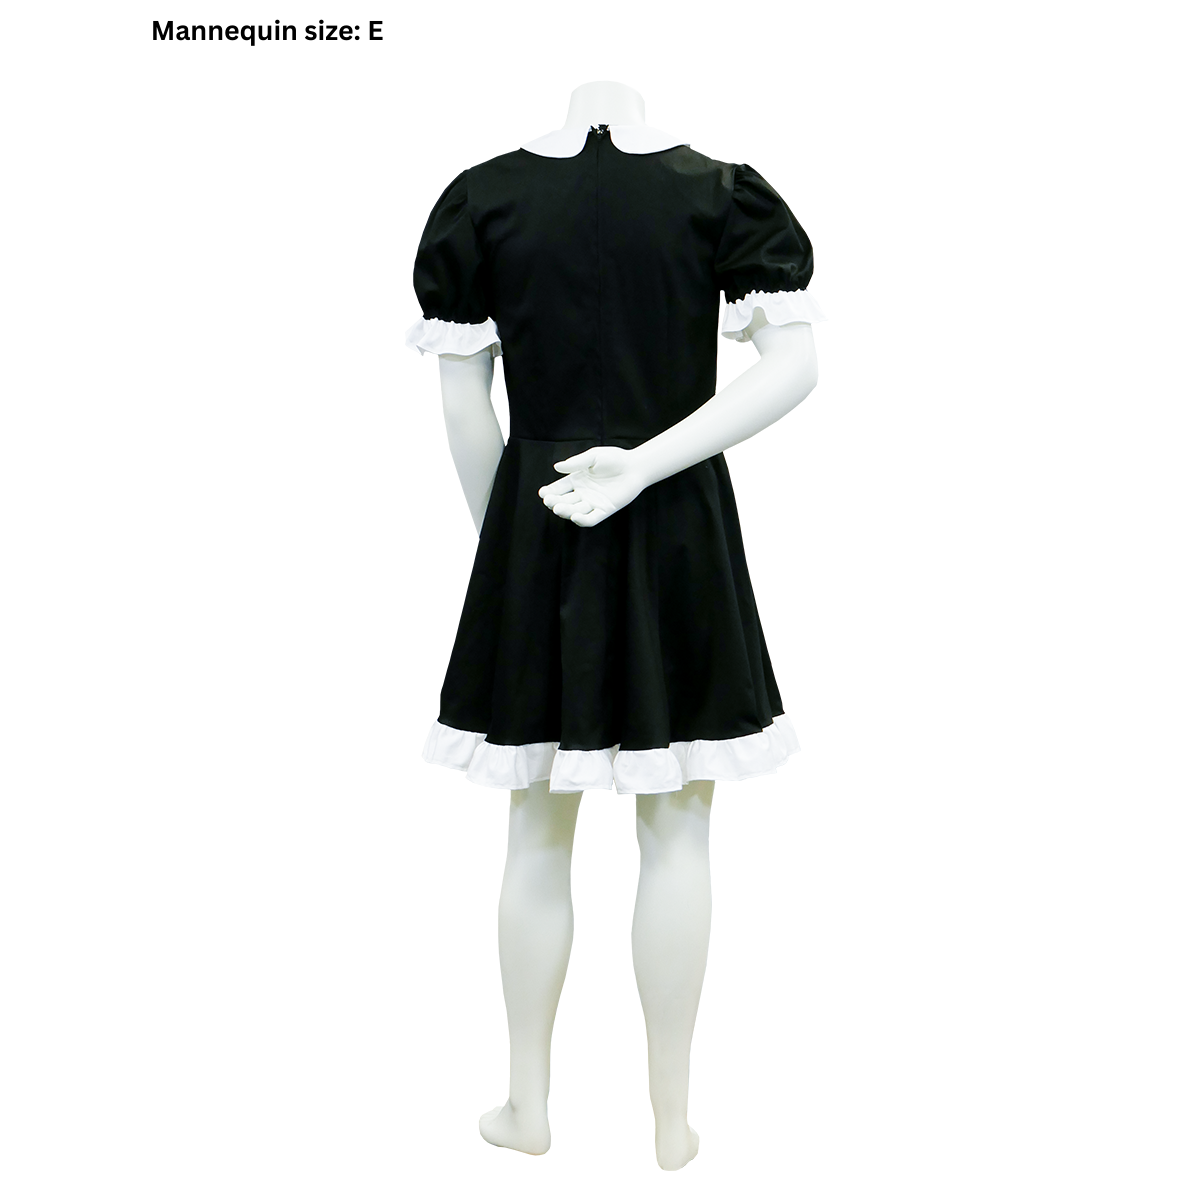 The reverse side of the dress part of the FSCO Maid Outfit (m) cosplay. Details of the puff sleeves are more prominent. The skirt hits just above the back of the knee on this mannequin.